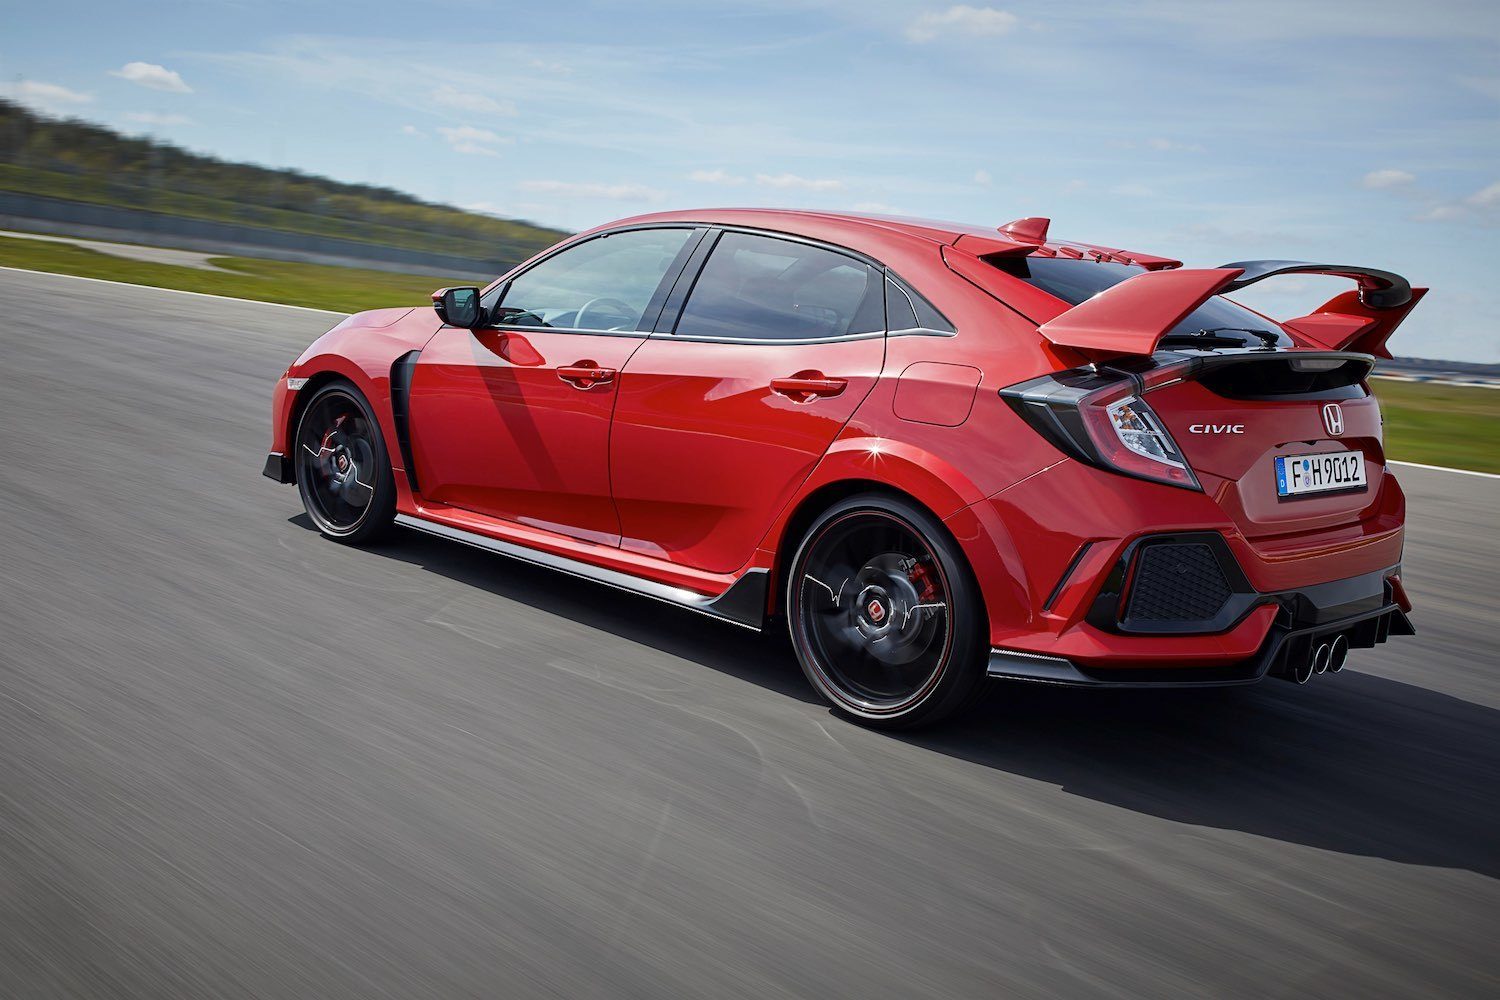 Tim Barnes-Clay reviews the 2018 Honda Civic Type R at the first drives 6